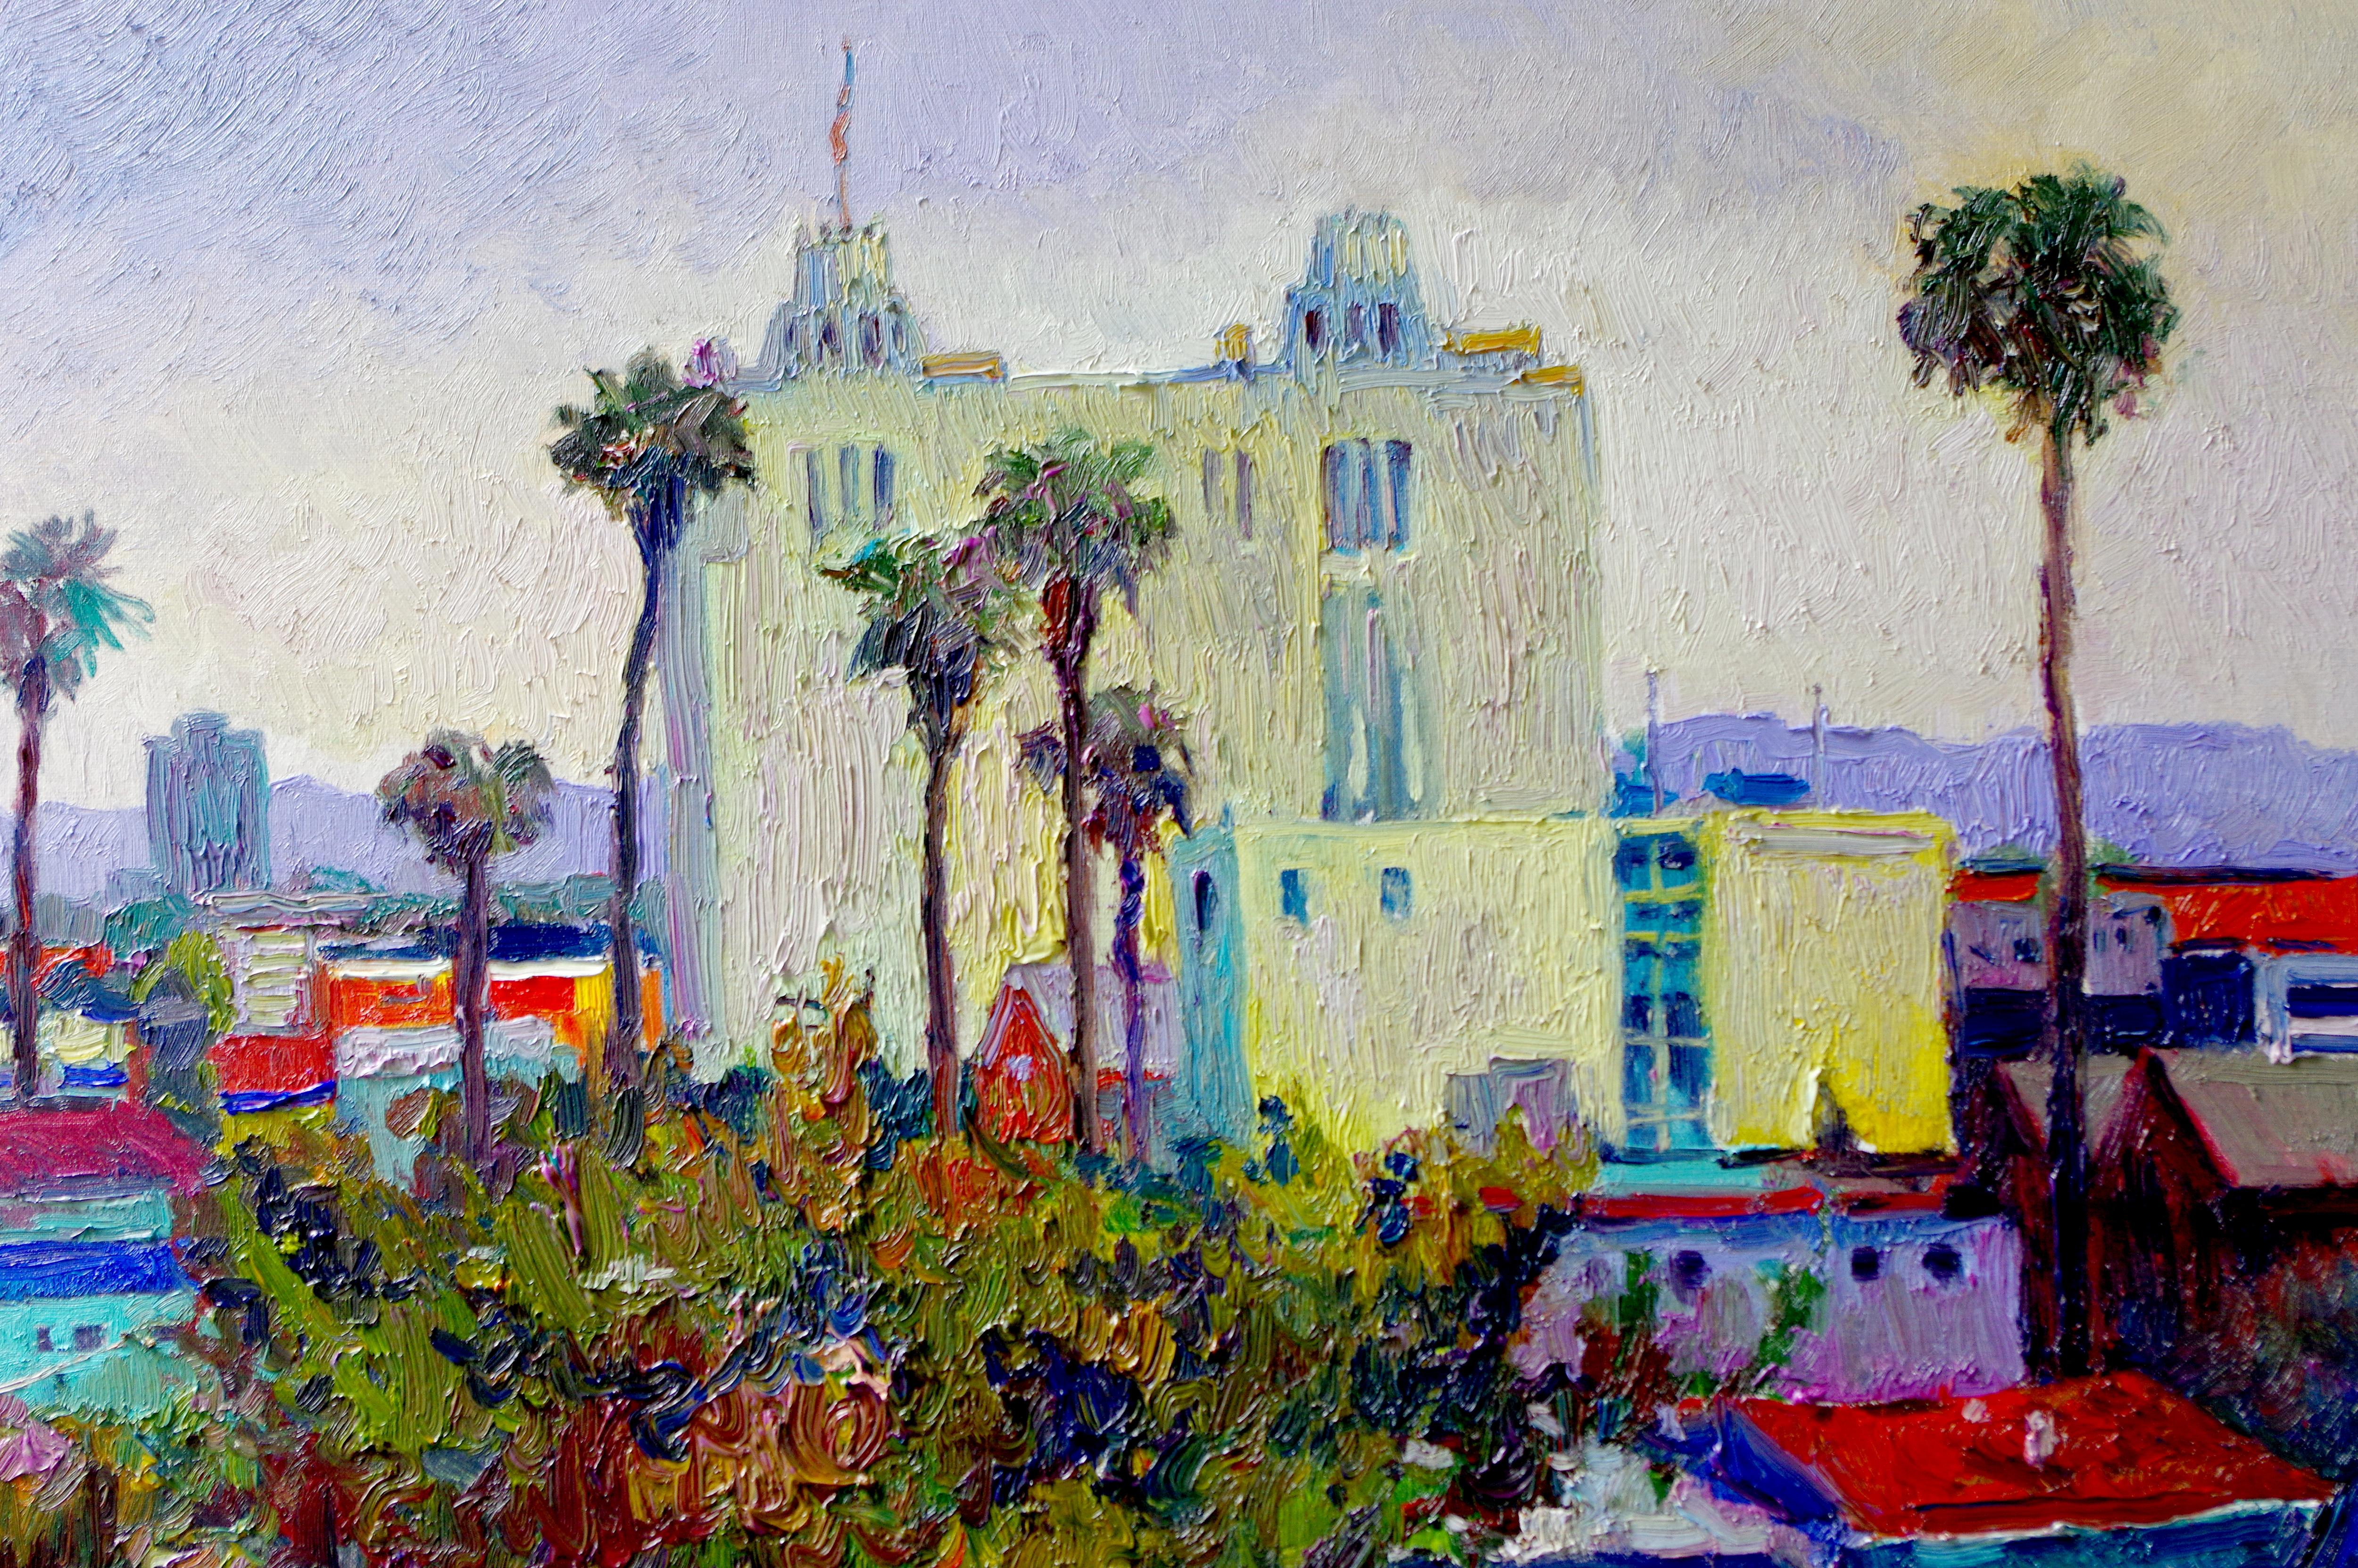 Early Evening in Los Angeles, a View from Hollywood - Abstract Impressionist Art by Suren Nersisyan